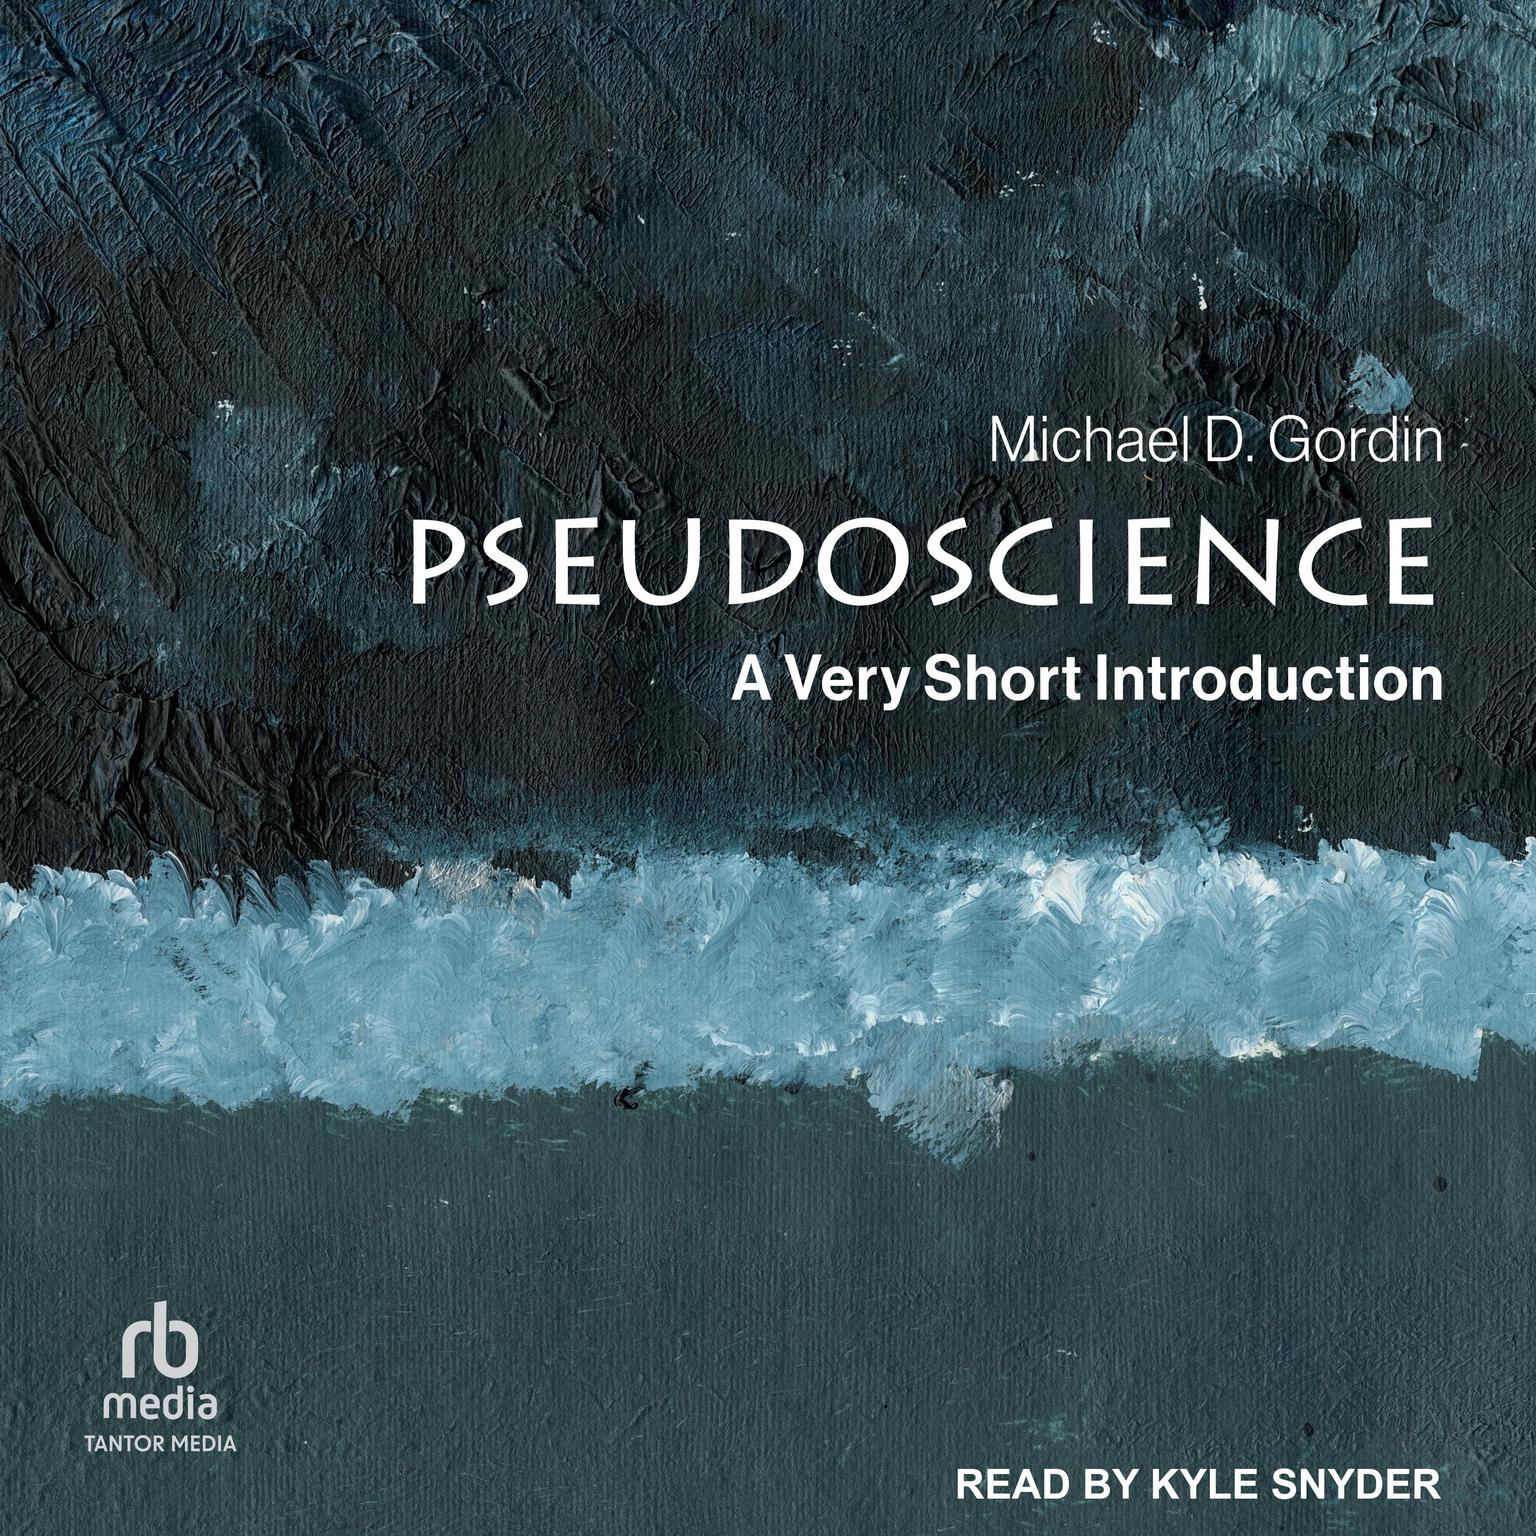 Pseudoscience: A Very Short Introduction Audiobook, by Michael D. Gordin